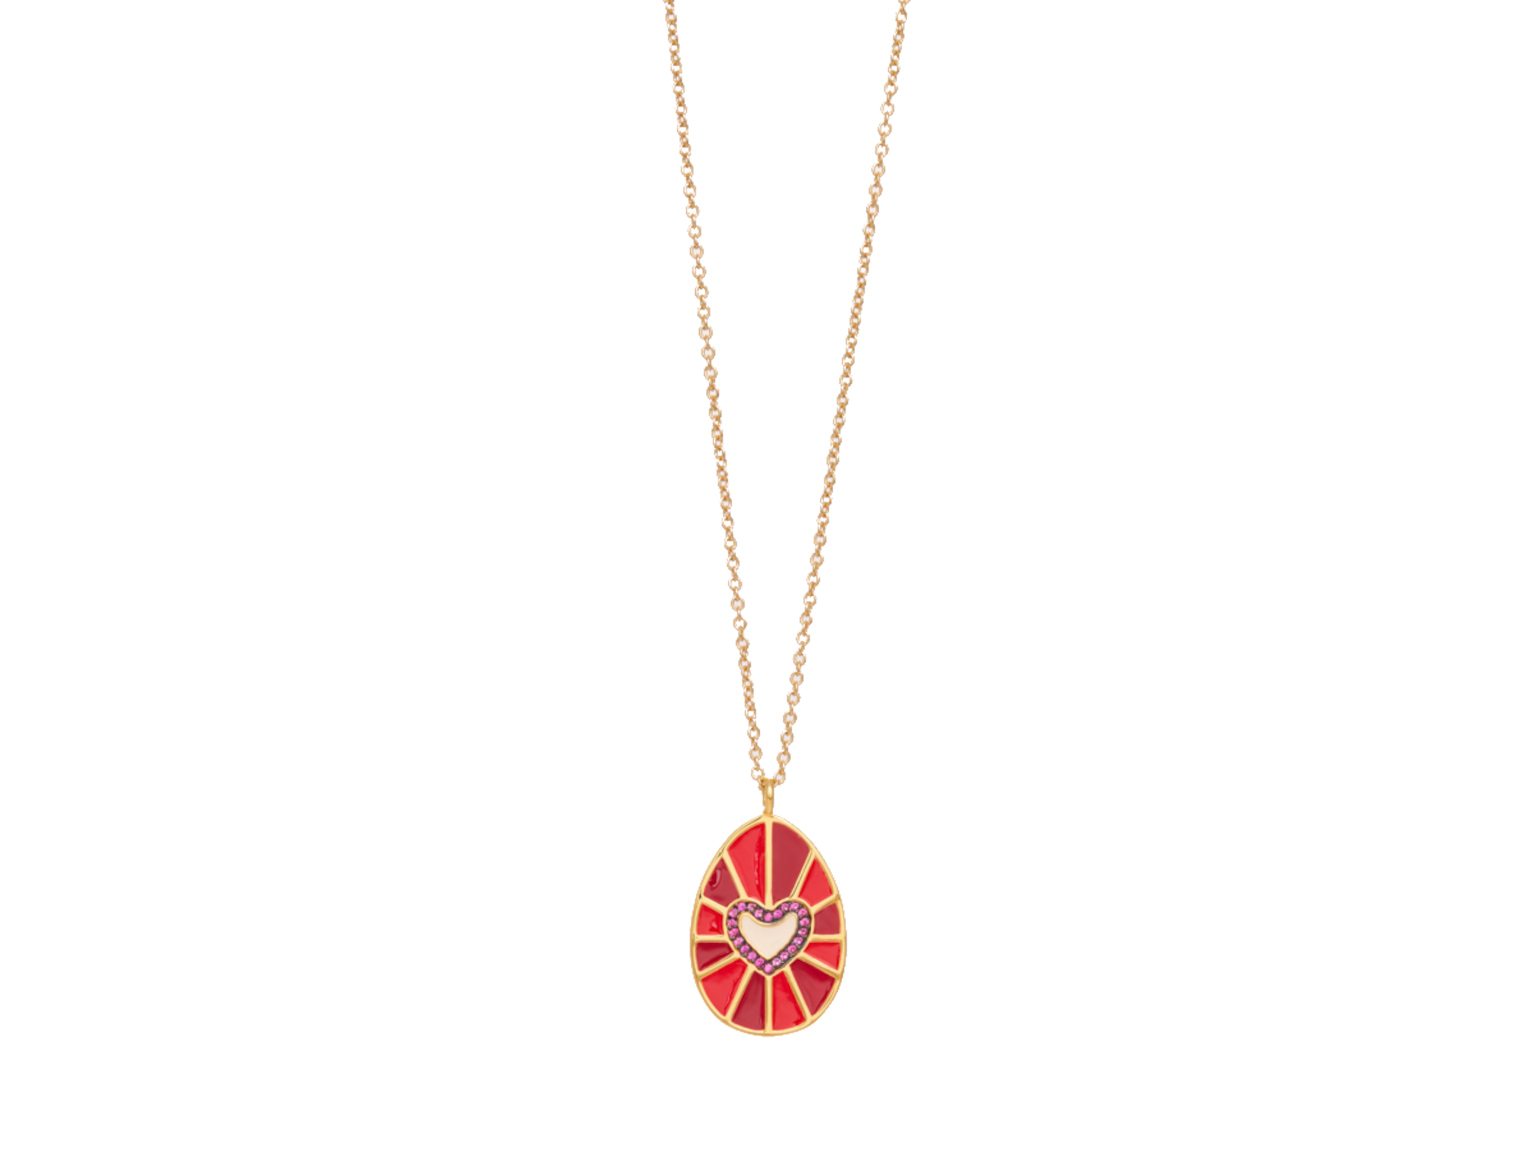 Gold plated egg pendant with red enamel